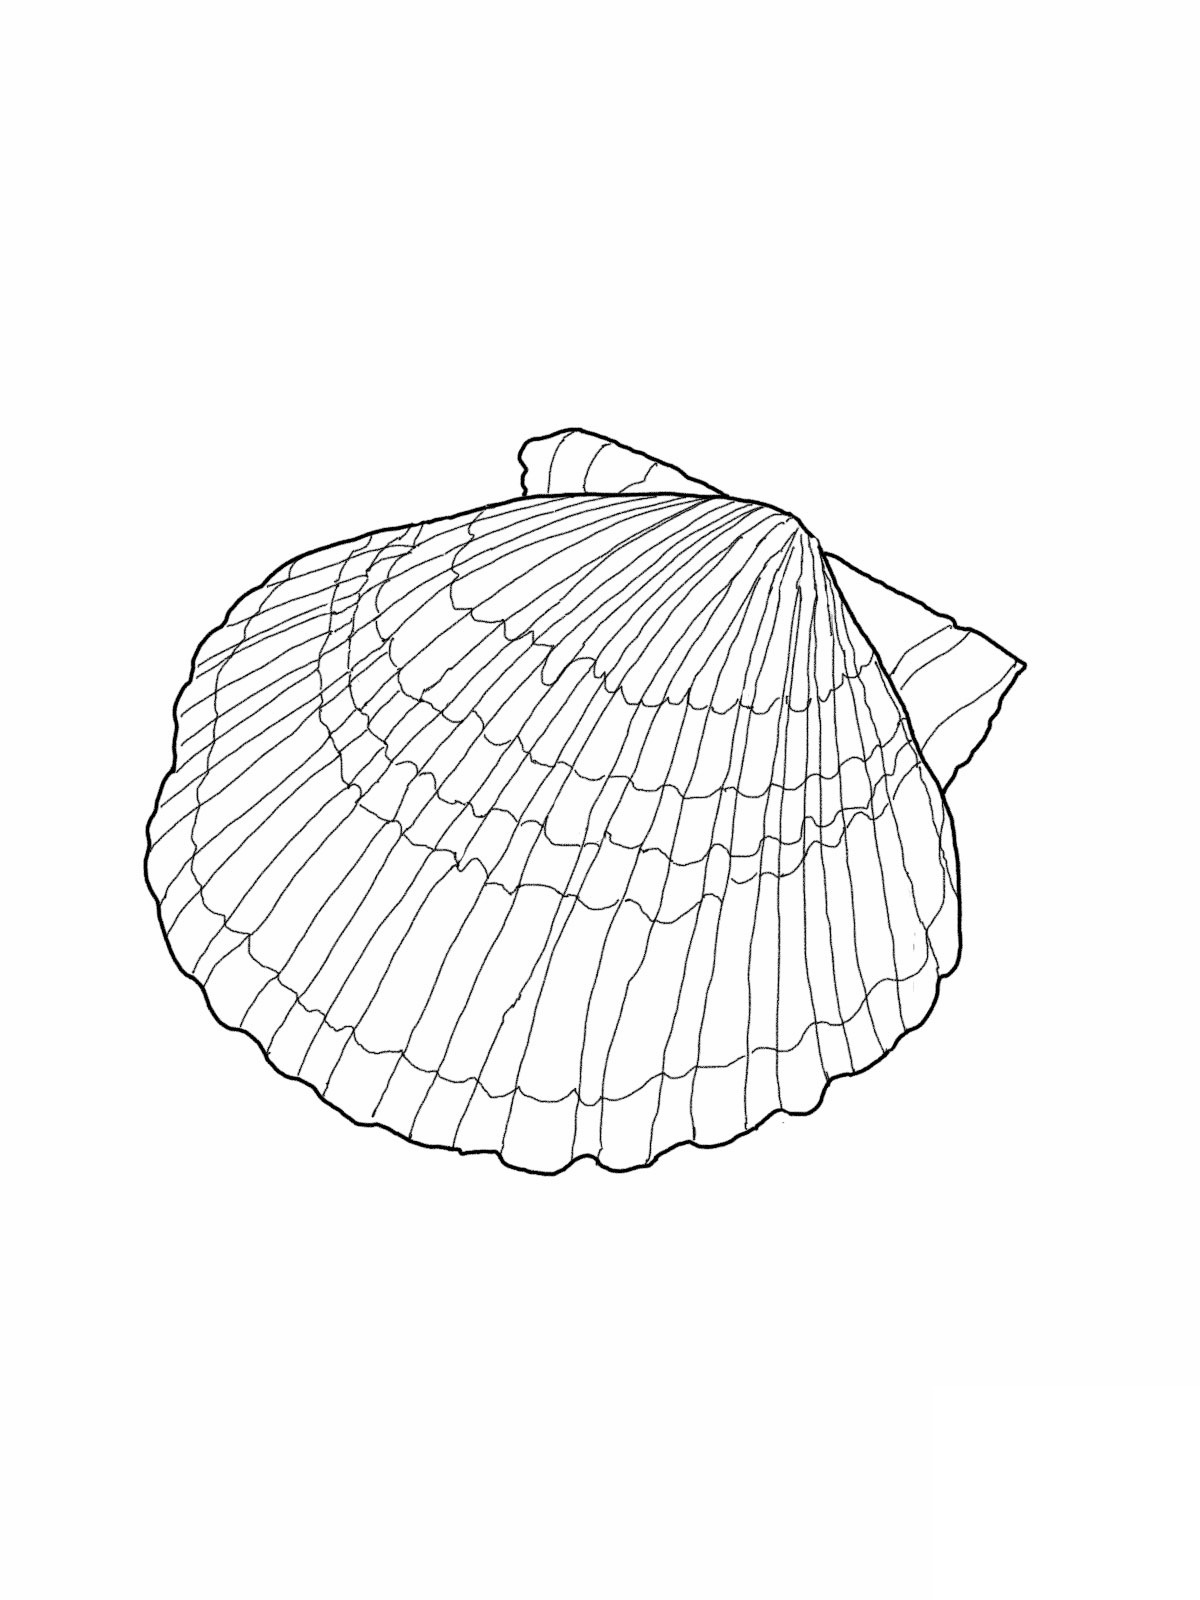 coloring pages of seashells